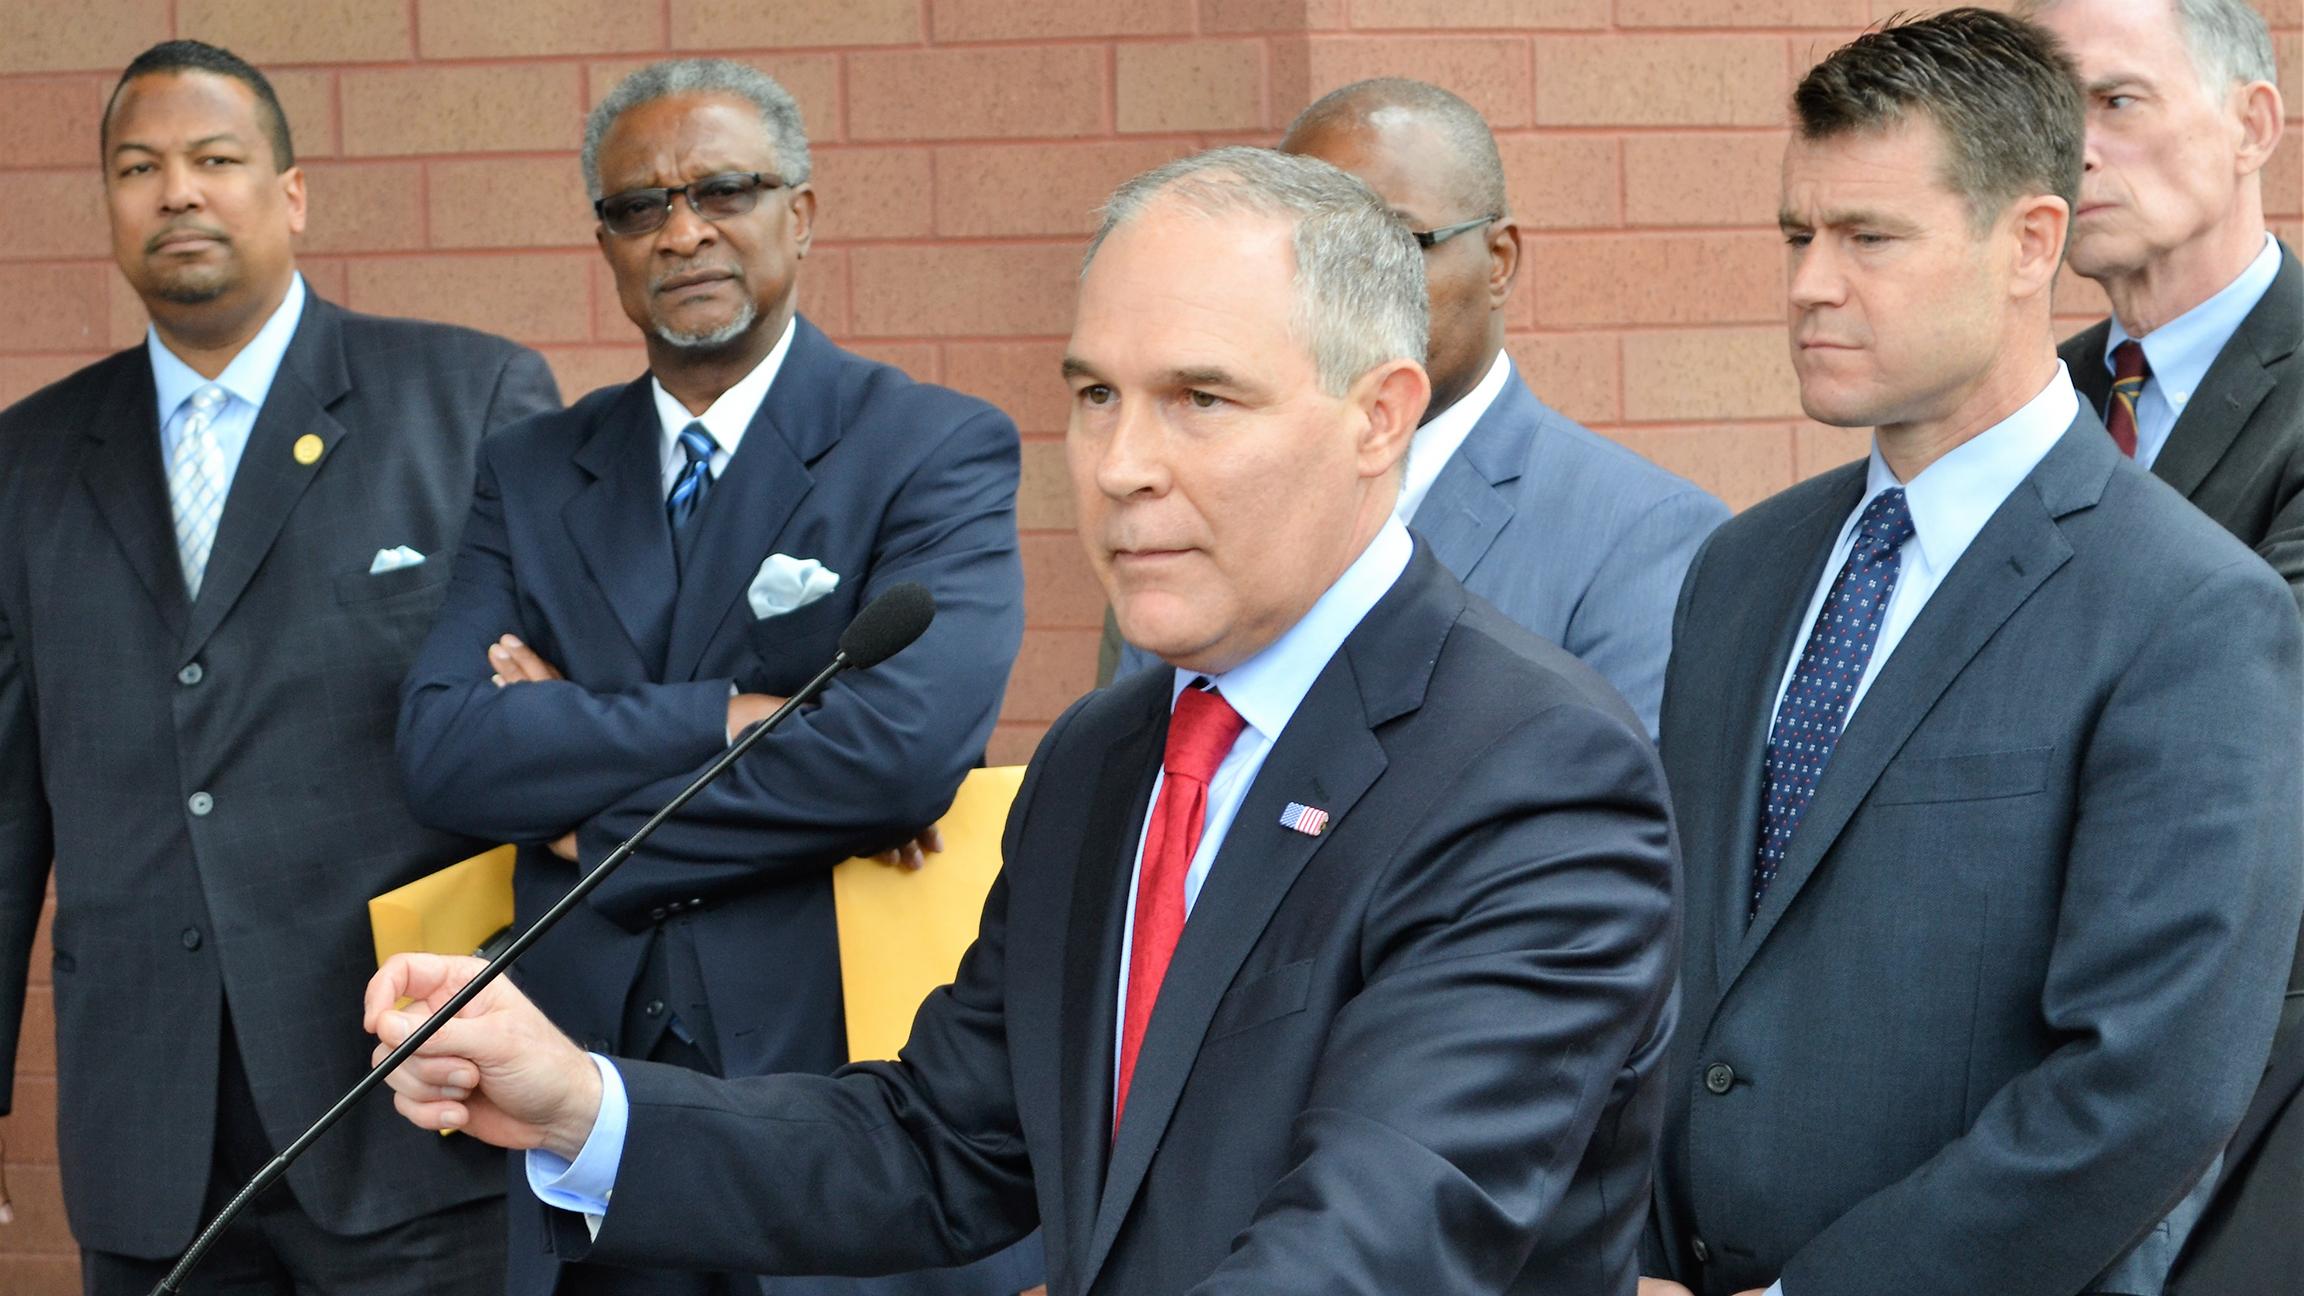 EPA Administrator Scott Pruitt speaks April 19 after meeting with residents of East Chicago’s lead-contaminated neighborhoods. (Alex Ruppenthal / Chicago Tonight)